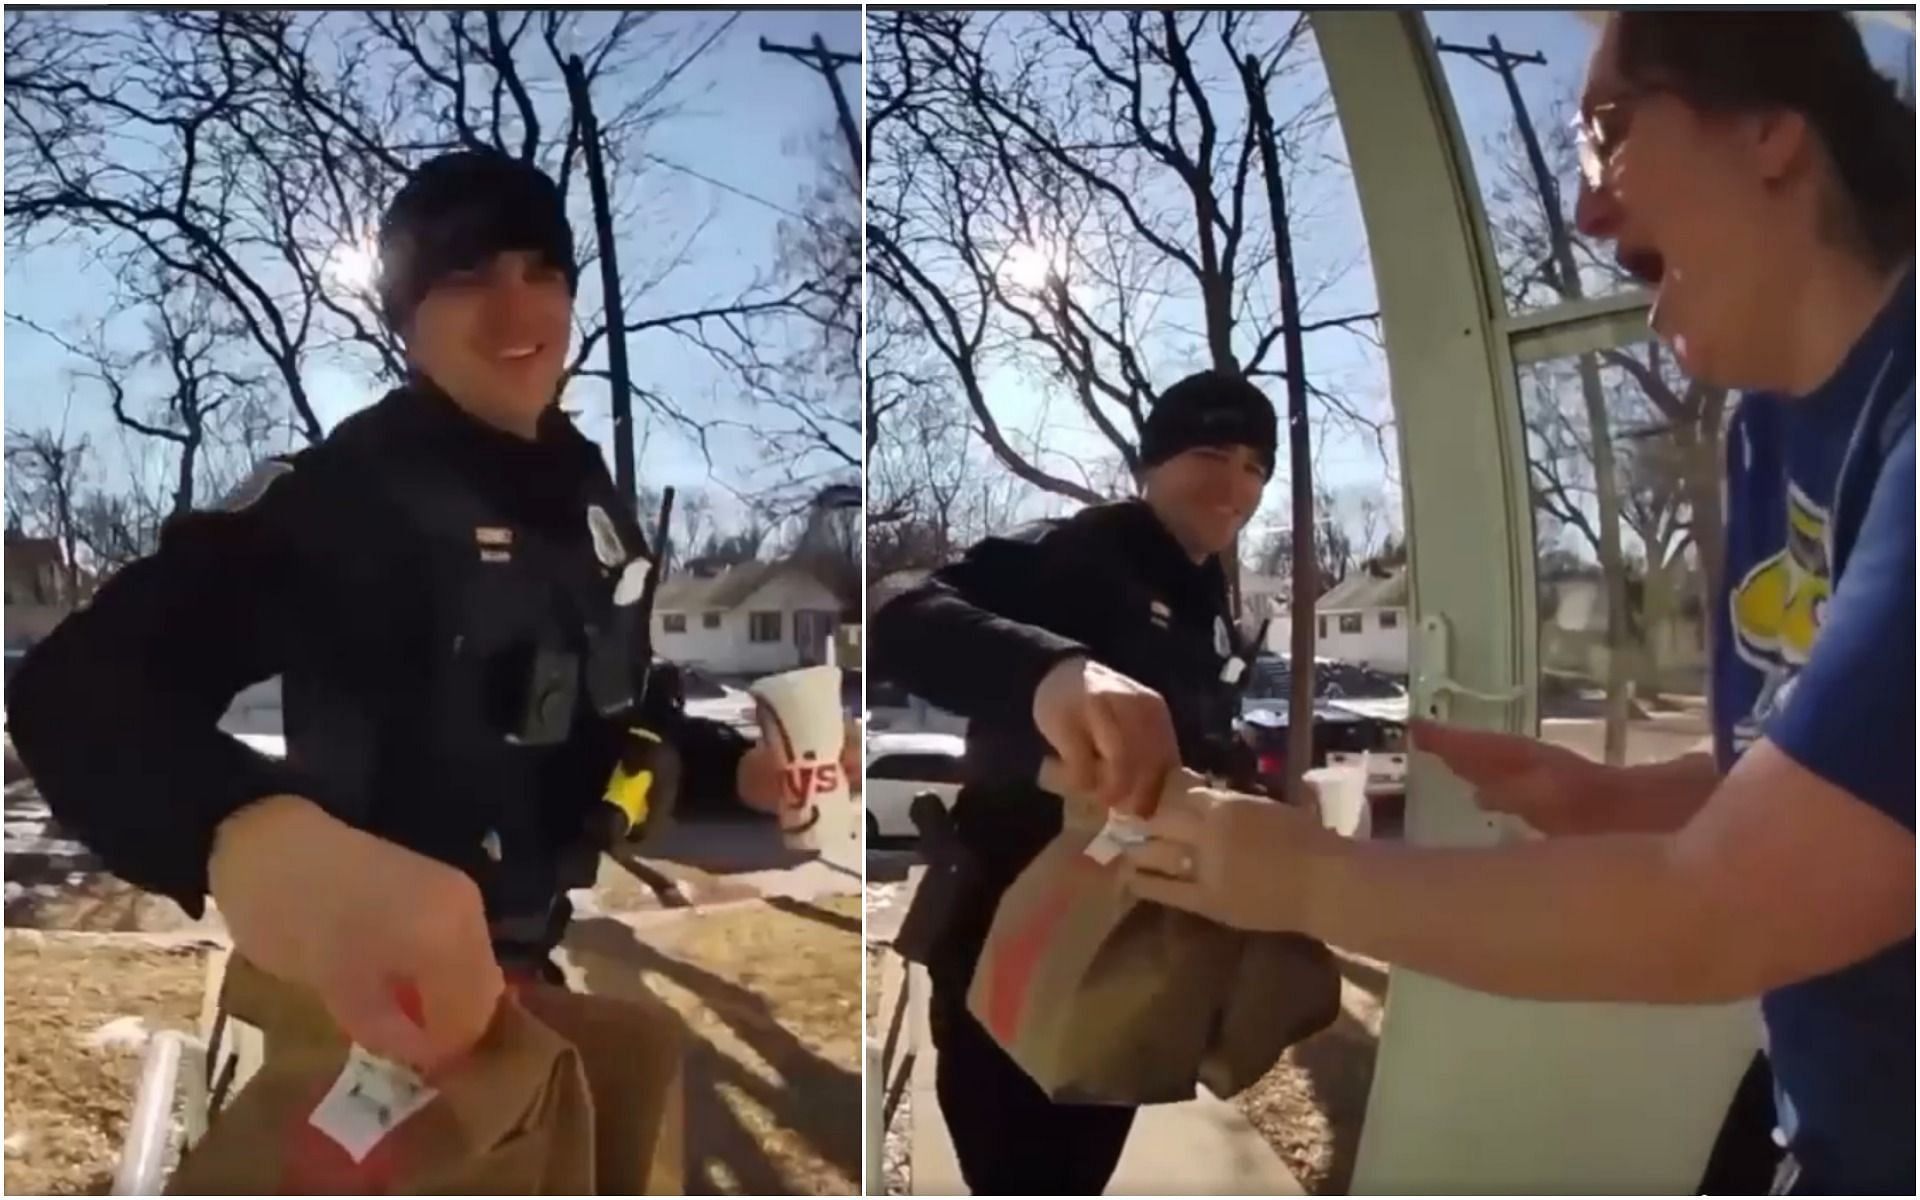 South Dakota officer completes a food delivery after arresting the delivery person (Image via Facebook/Humanizing the Badge)